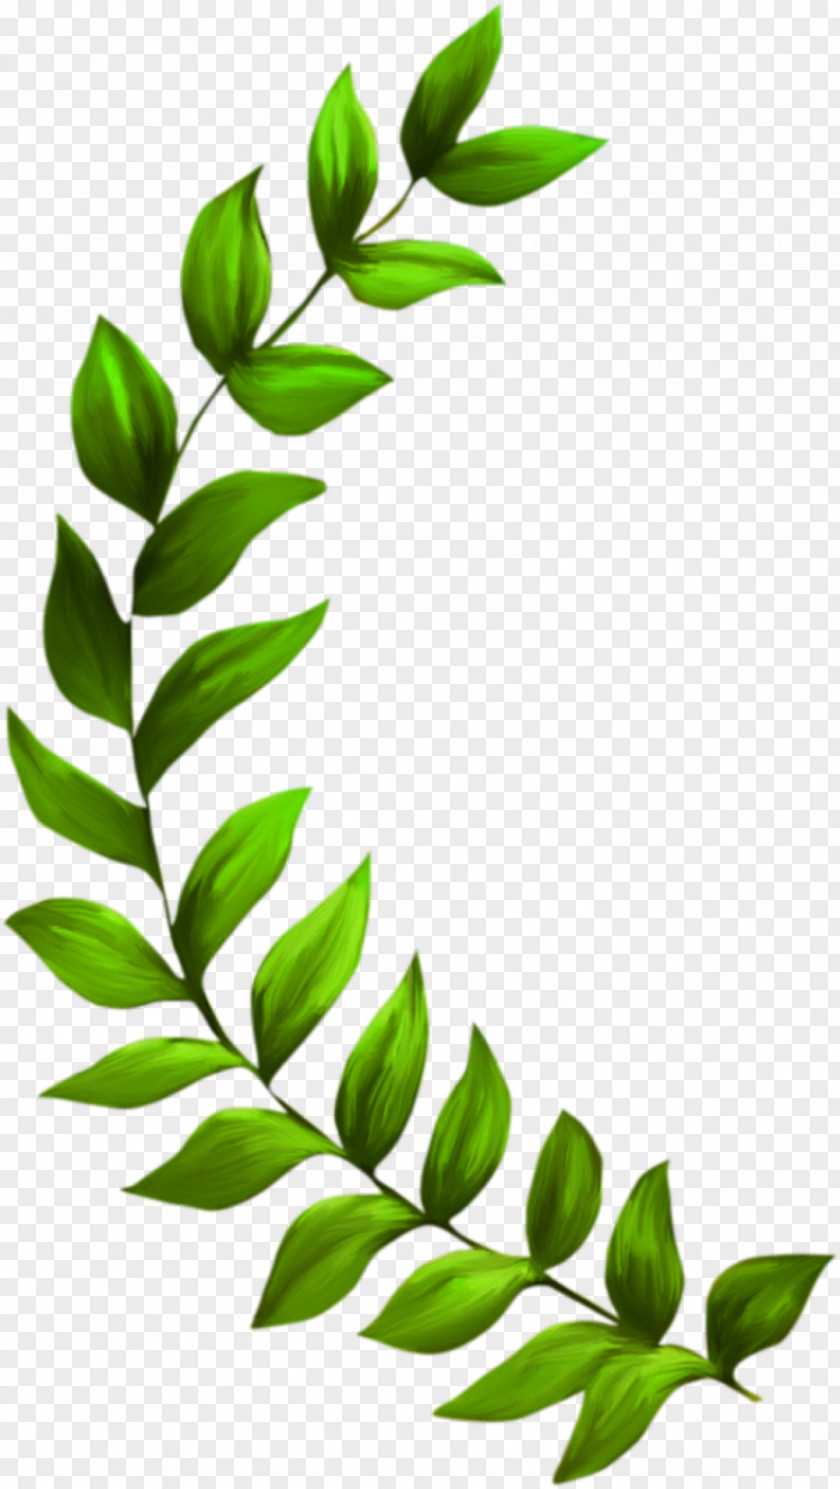 Grass Seagrass Plant Seaweed Clip Art PNG